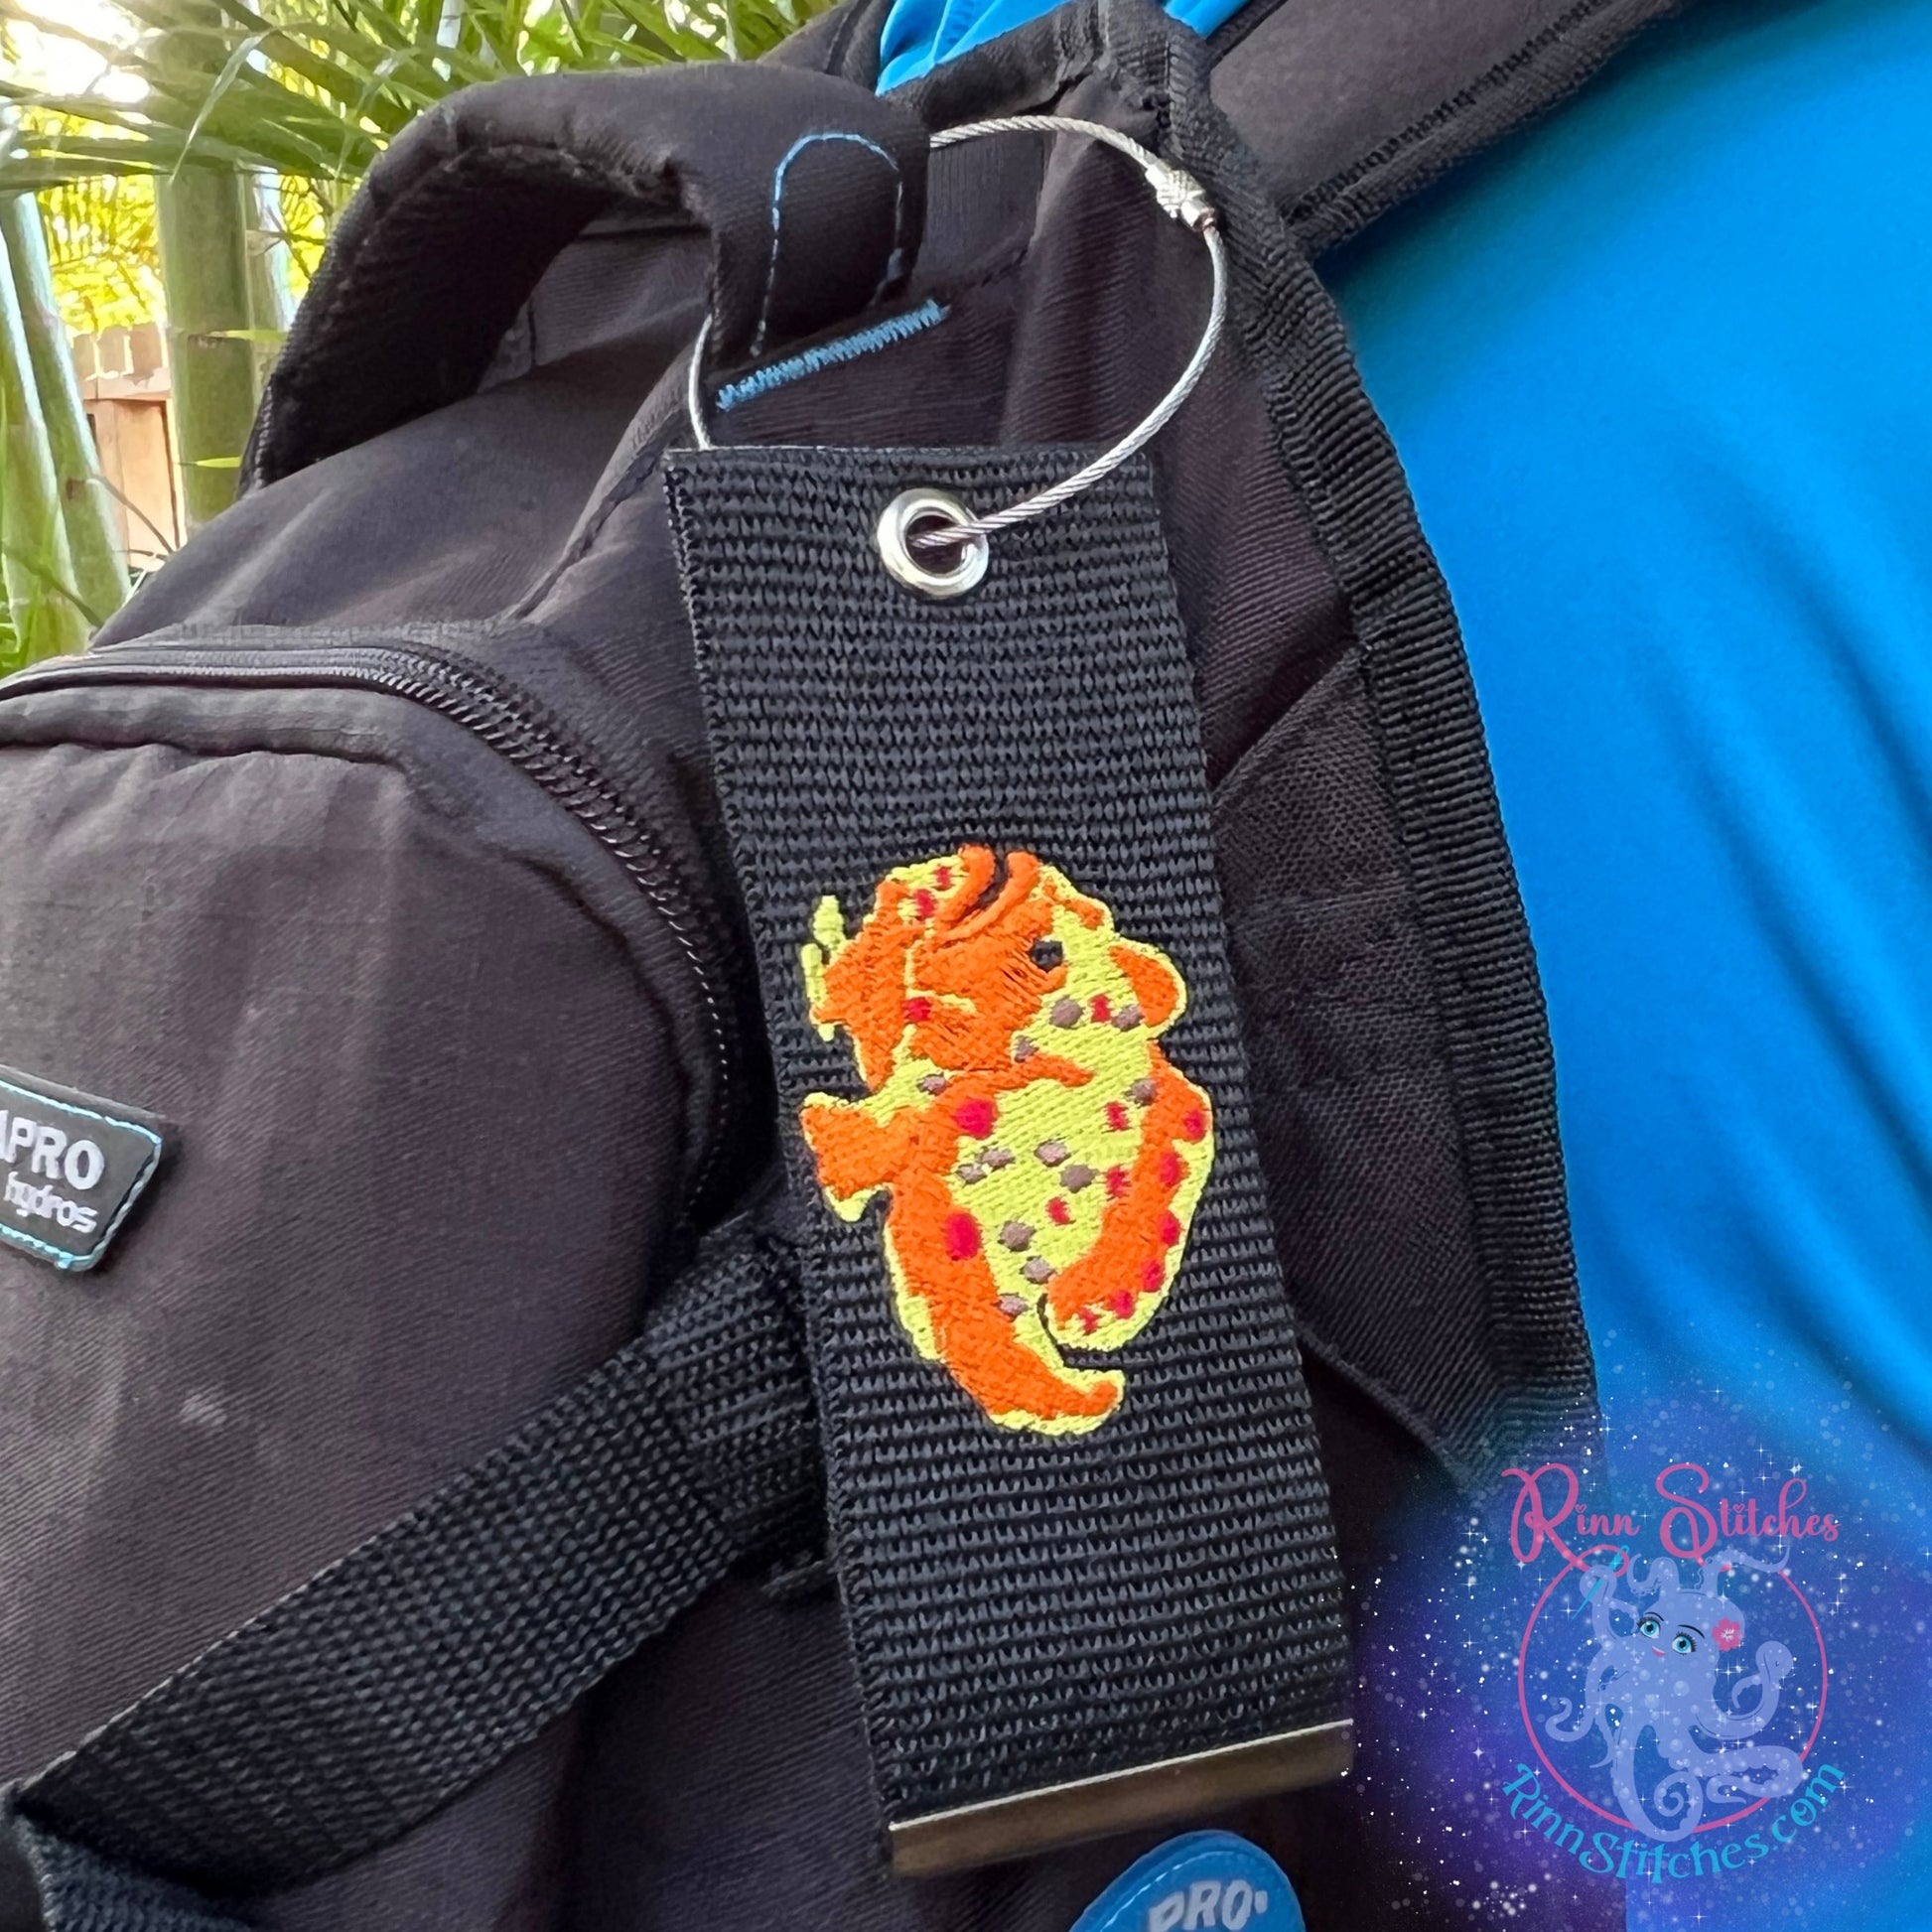 Frog Fish Luggage Tag, Personalized Embroidered Bag Tag for all your Travel needs by Rinn Stitches in Maui, Hawaii